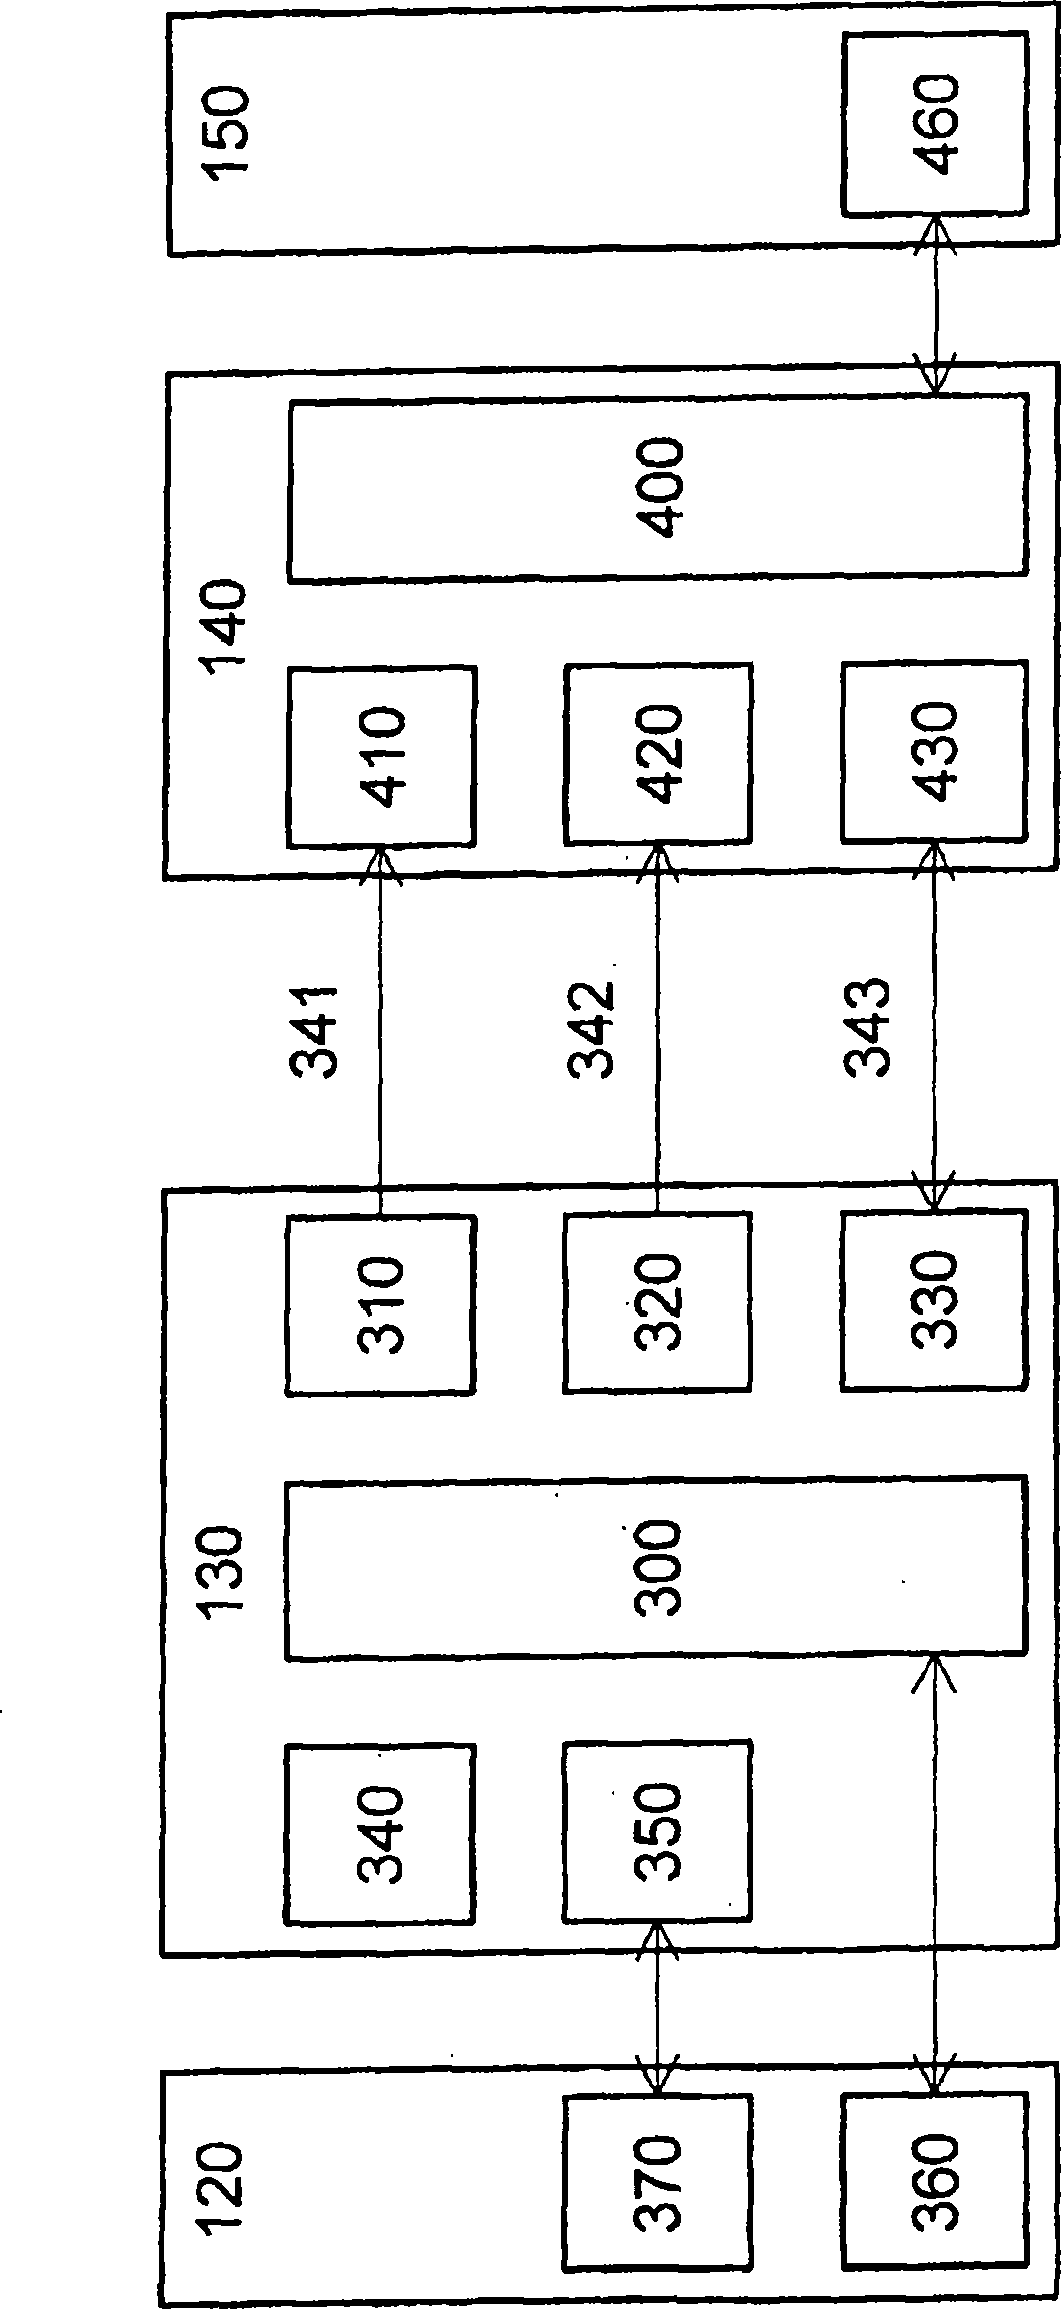 Method of transferring broadcast related information from a portable terminal to a nearby broadcast receiver